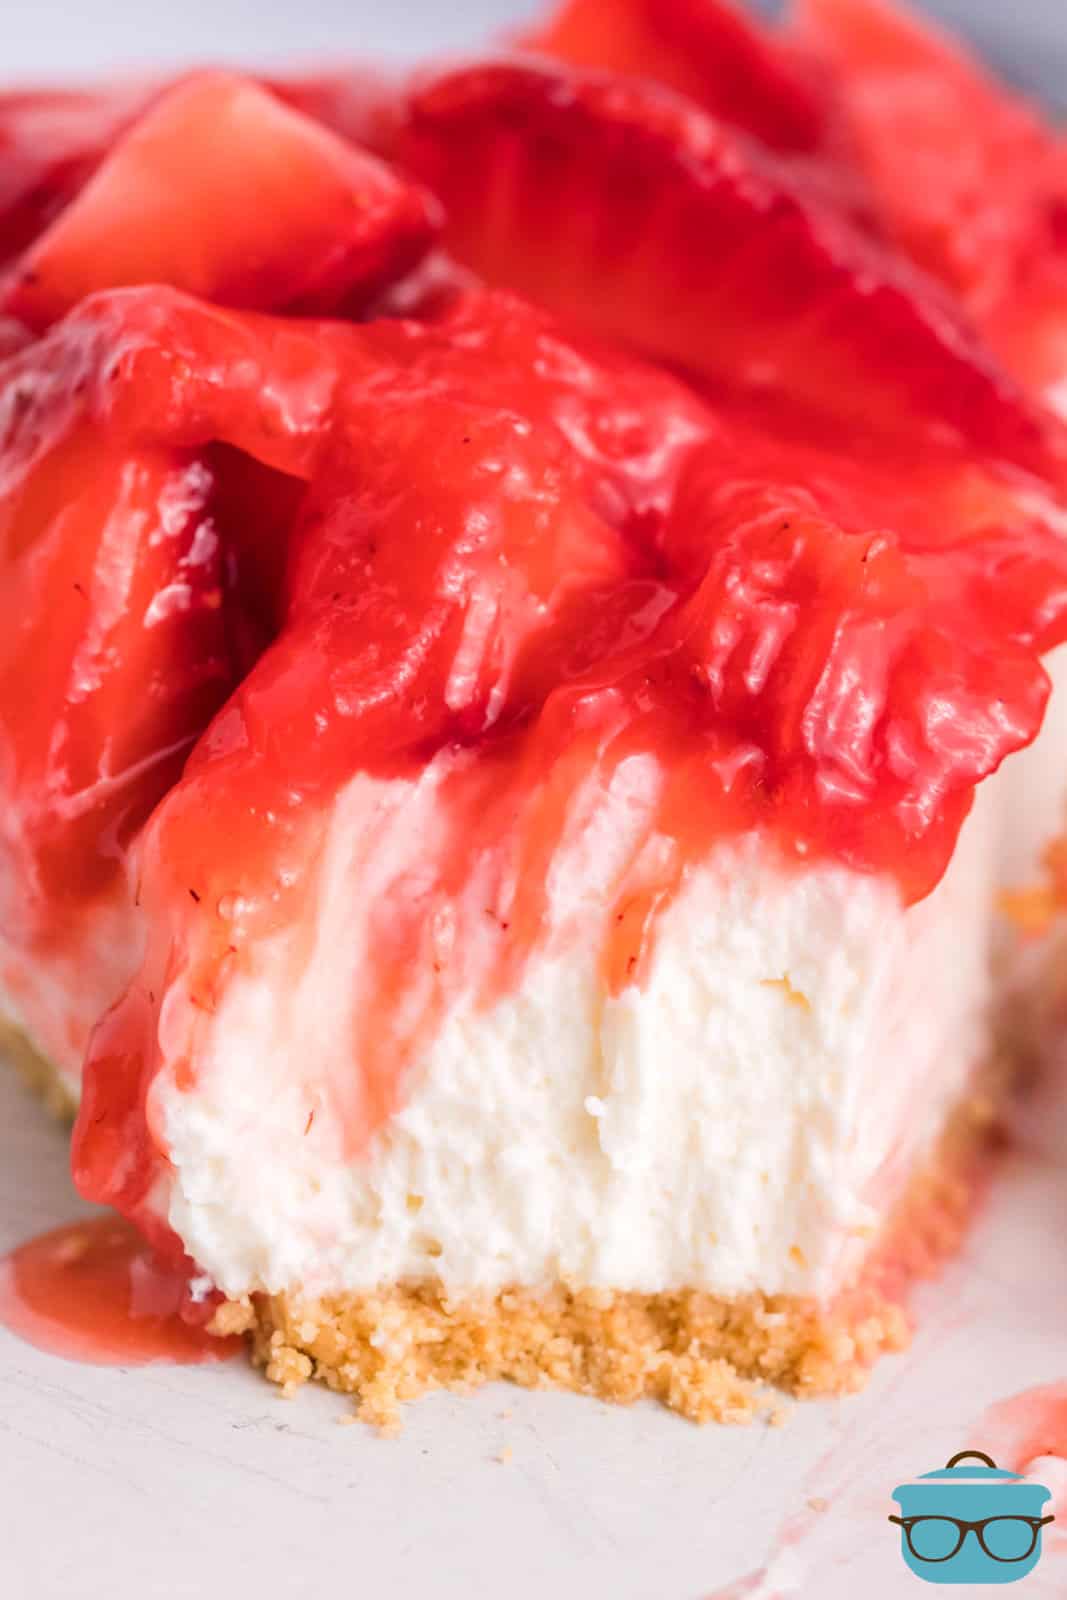 A piece of Strawberry Cream Cheese pie with a bite missing.